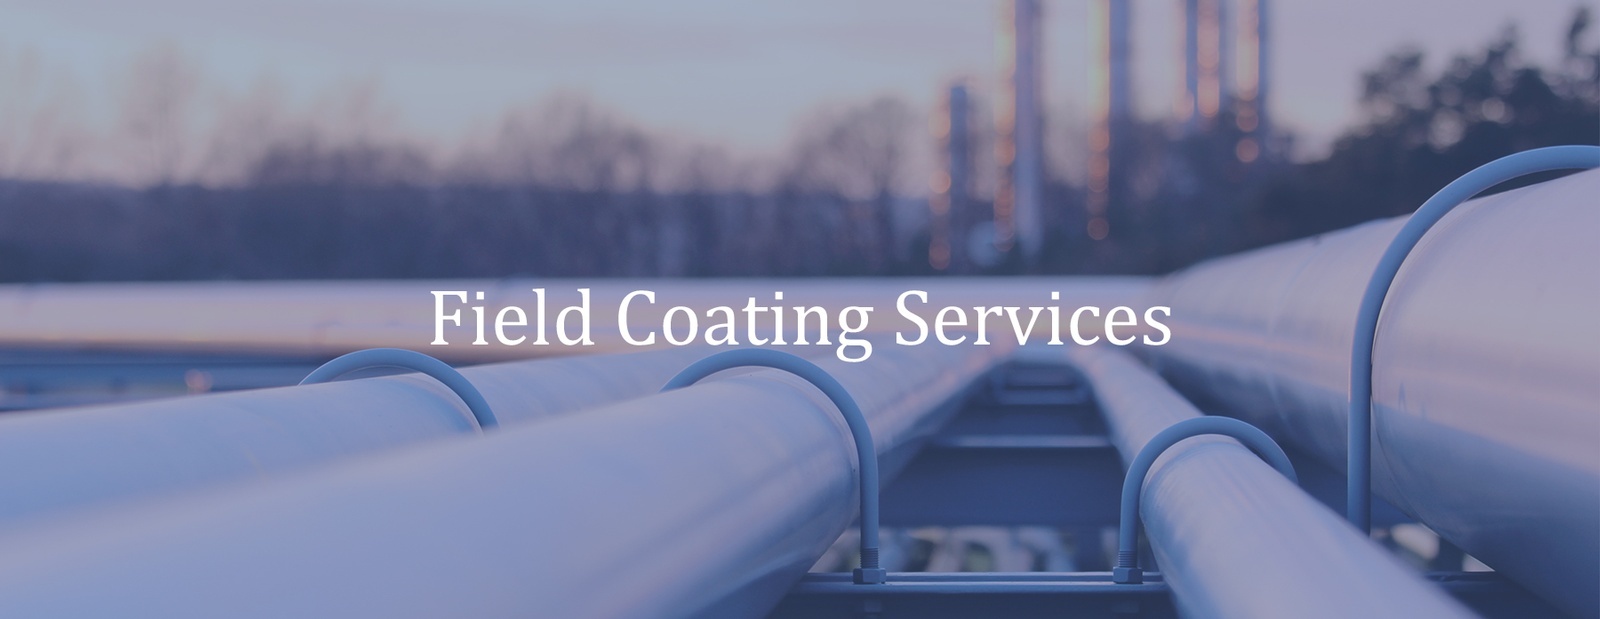 Field Coating Services